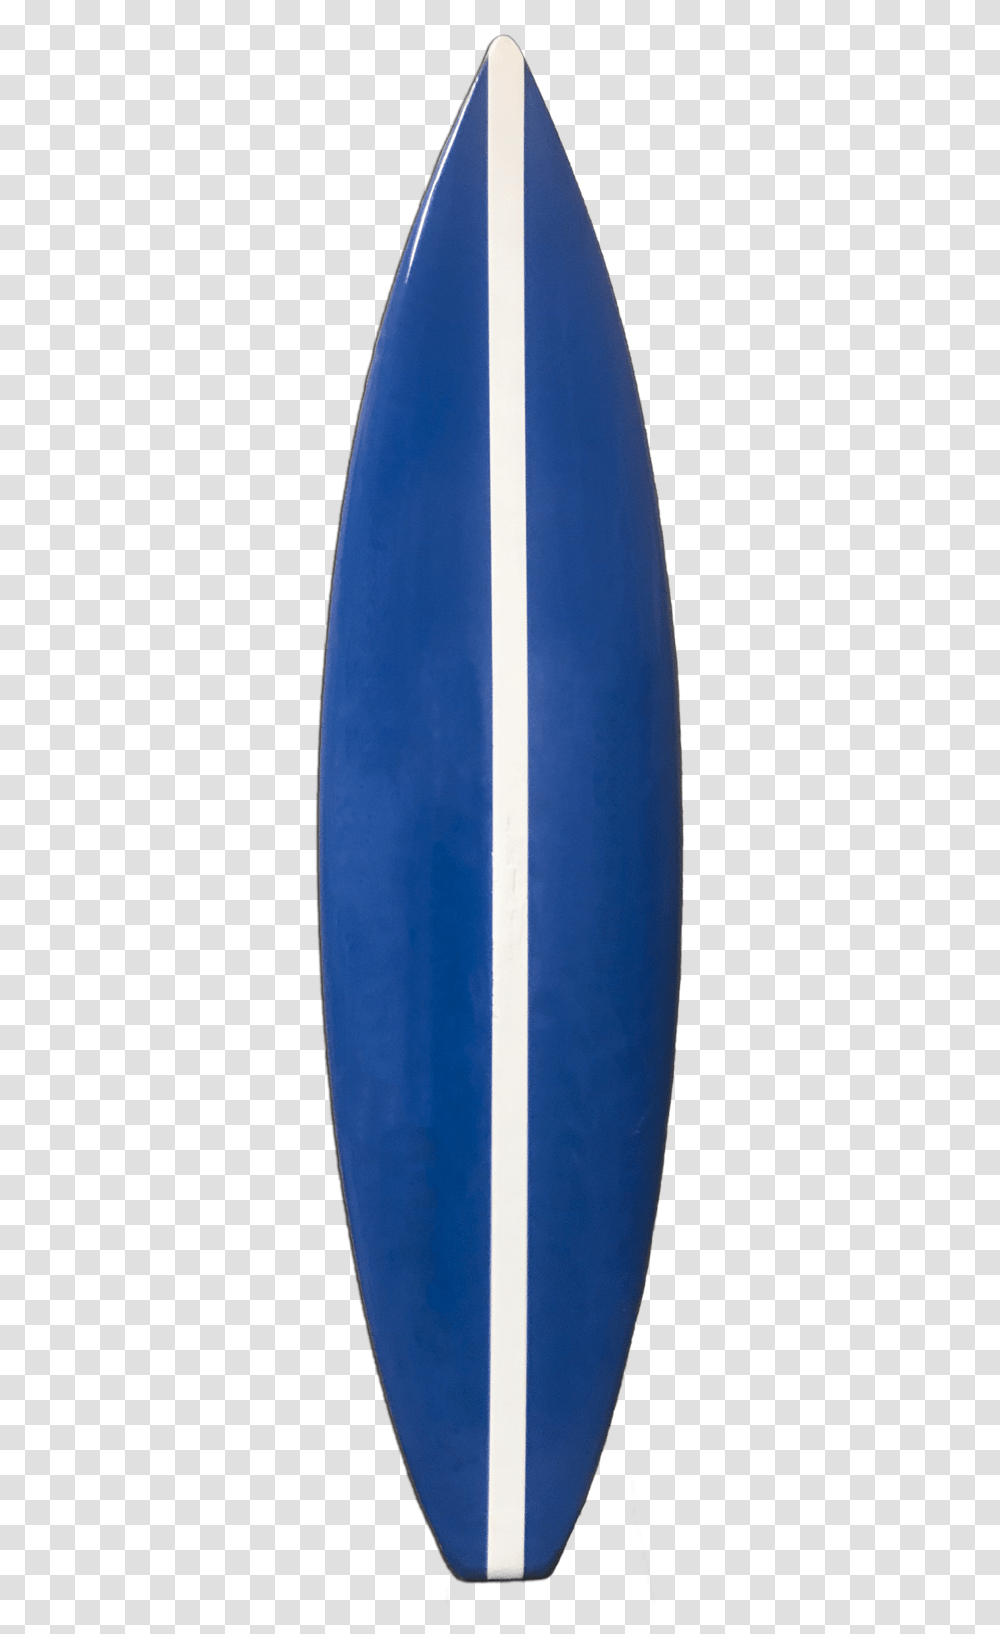 Blue Surf Board Surfboard, Sea, Outdoors, Water, Nature Transparent Png